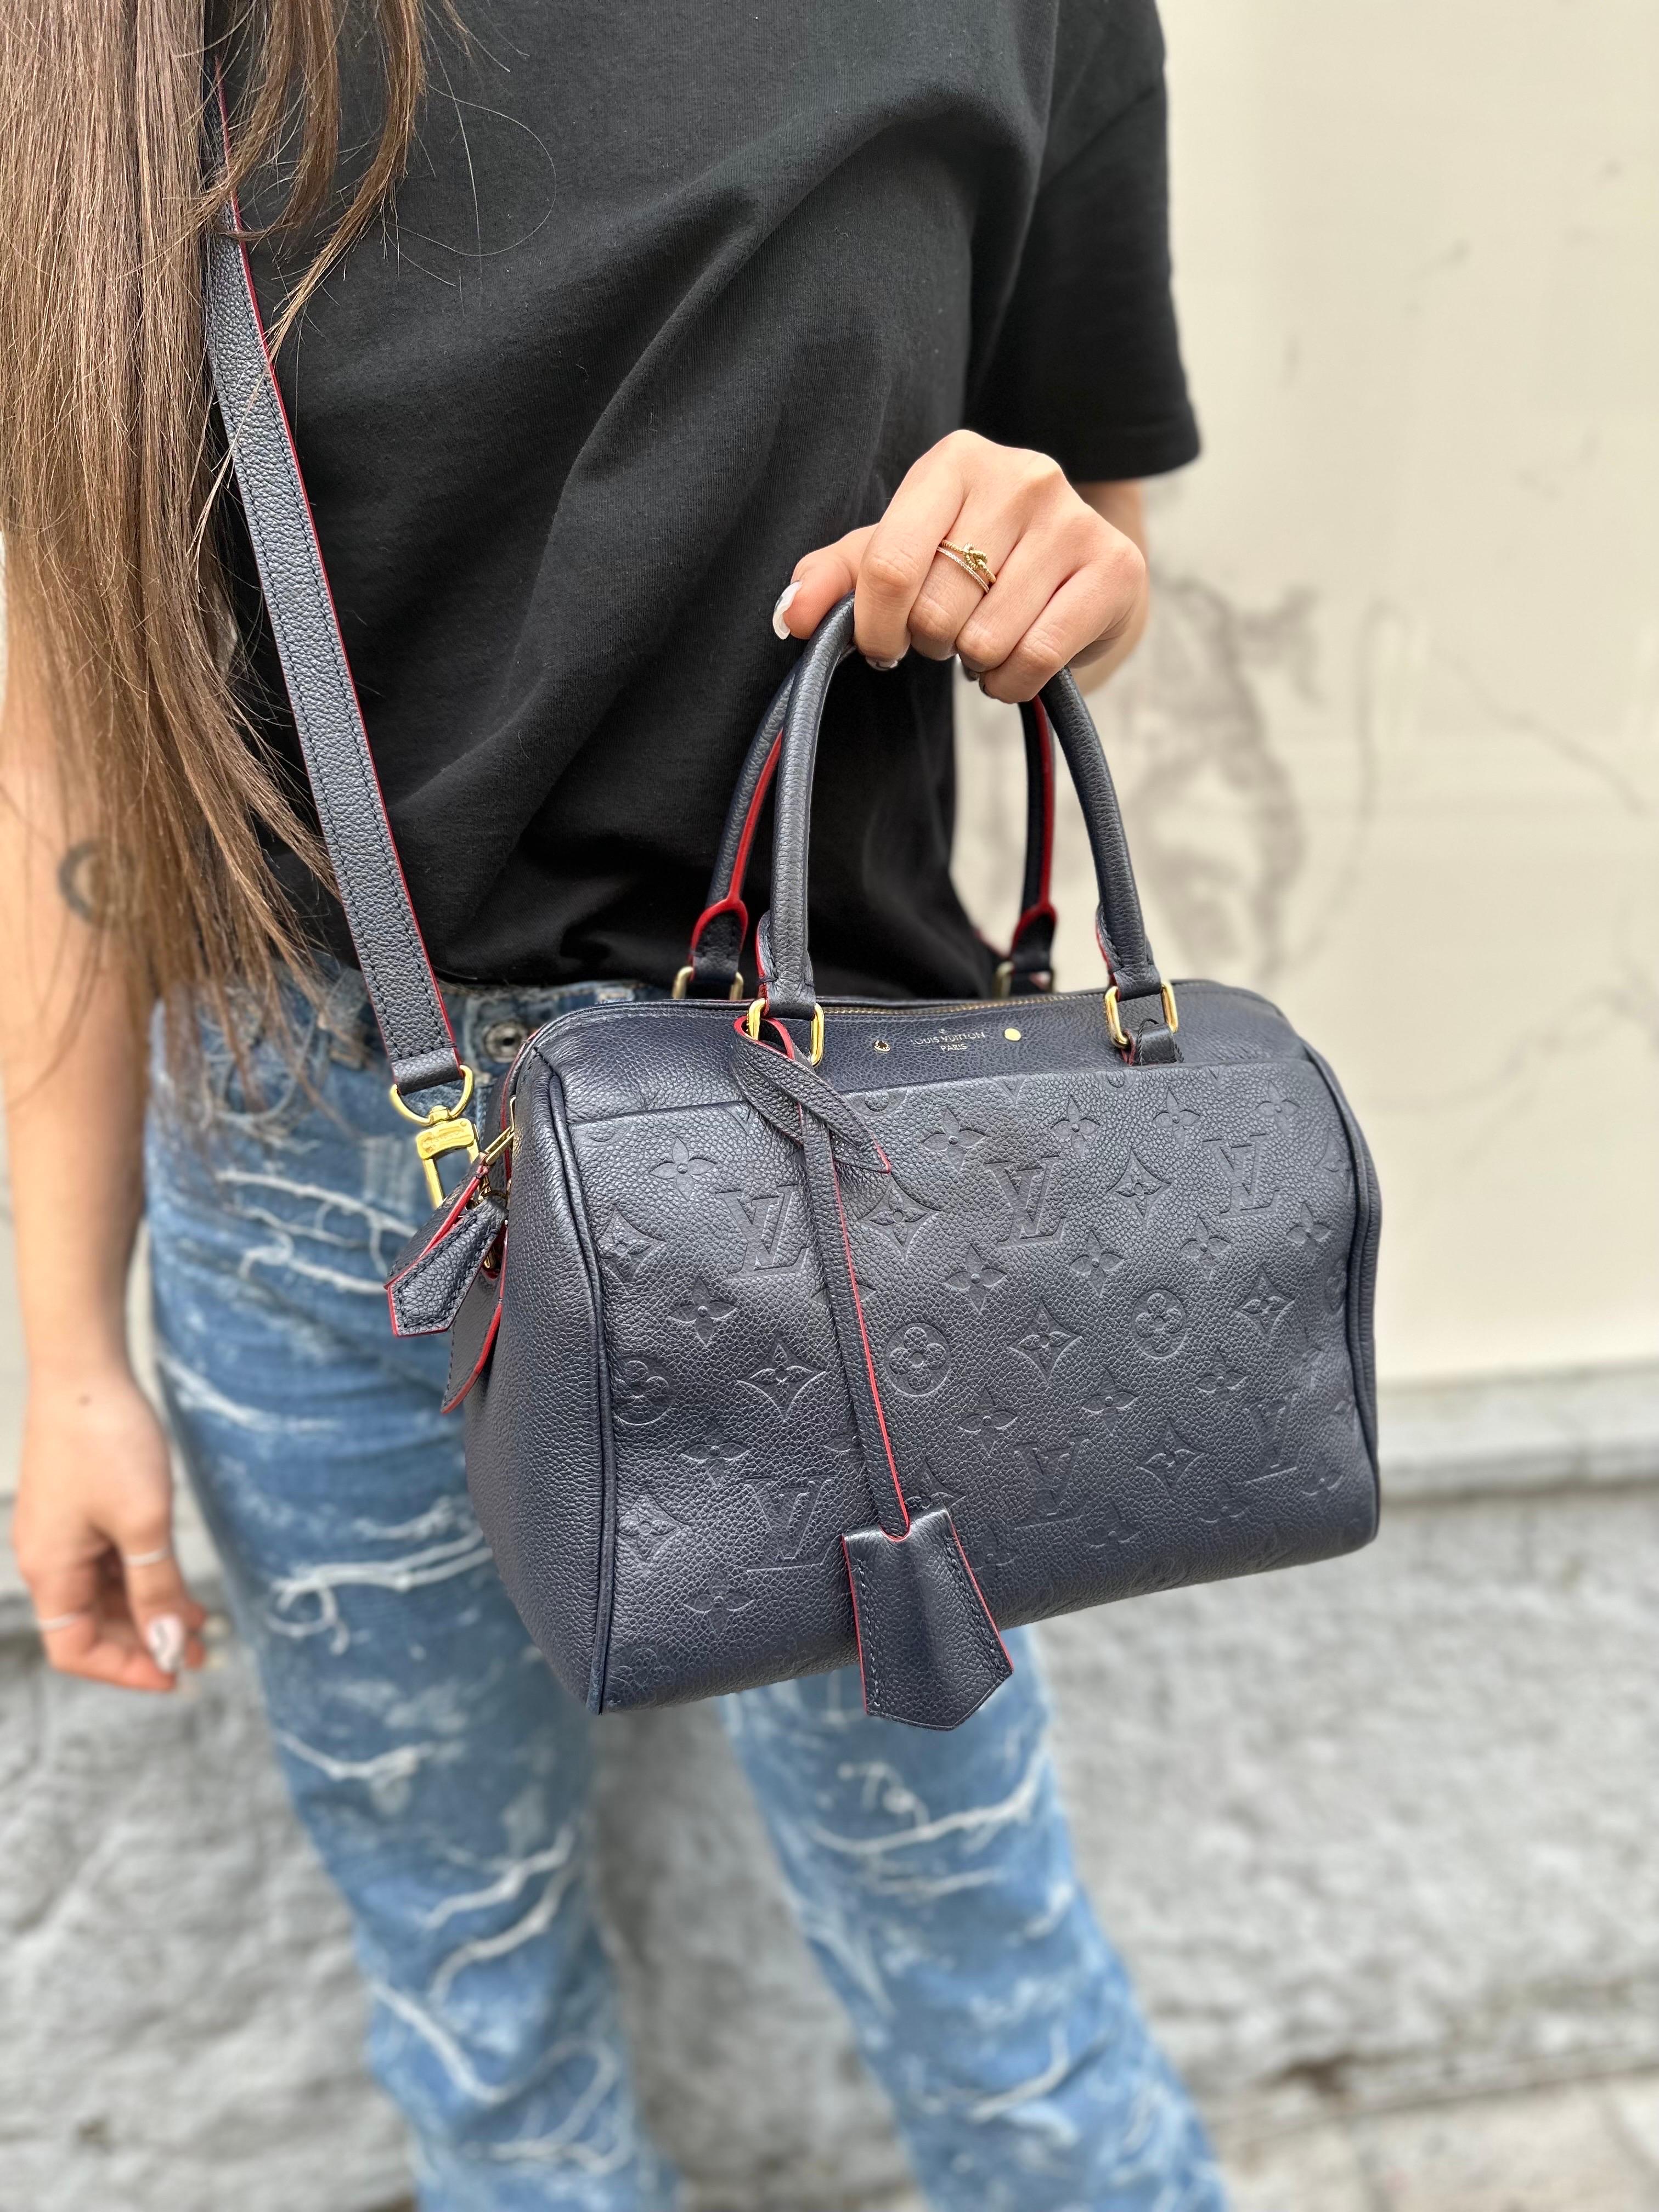 Bag by Louis Vuitton, Speedy Empreinte model, size 25, made of midnight blue leather in the classic Monogram pattern with red leather trim and gold hardware. Equipped with a double carriage zip top closure and a front pocket. Equipped with a double